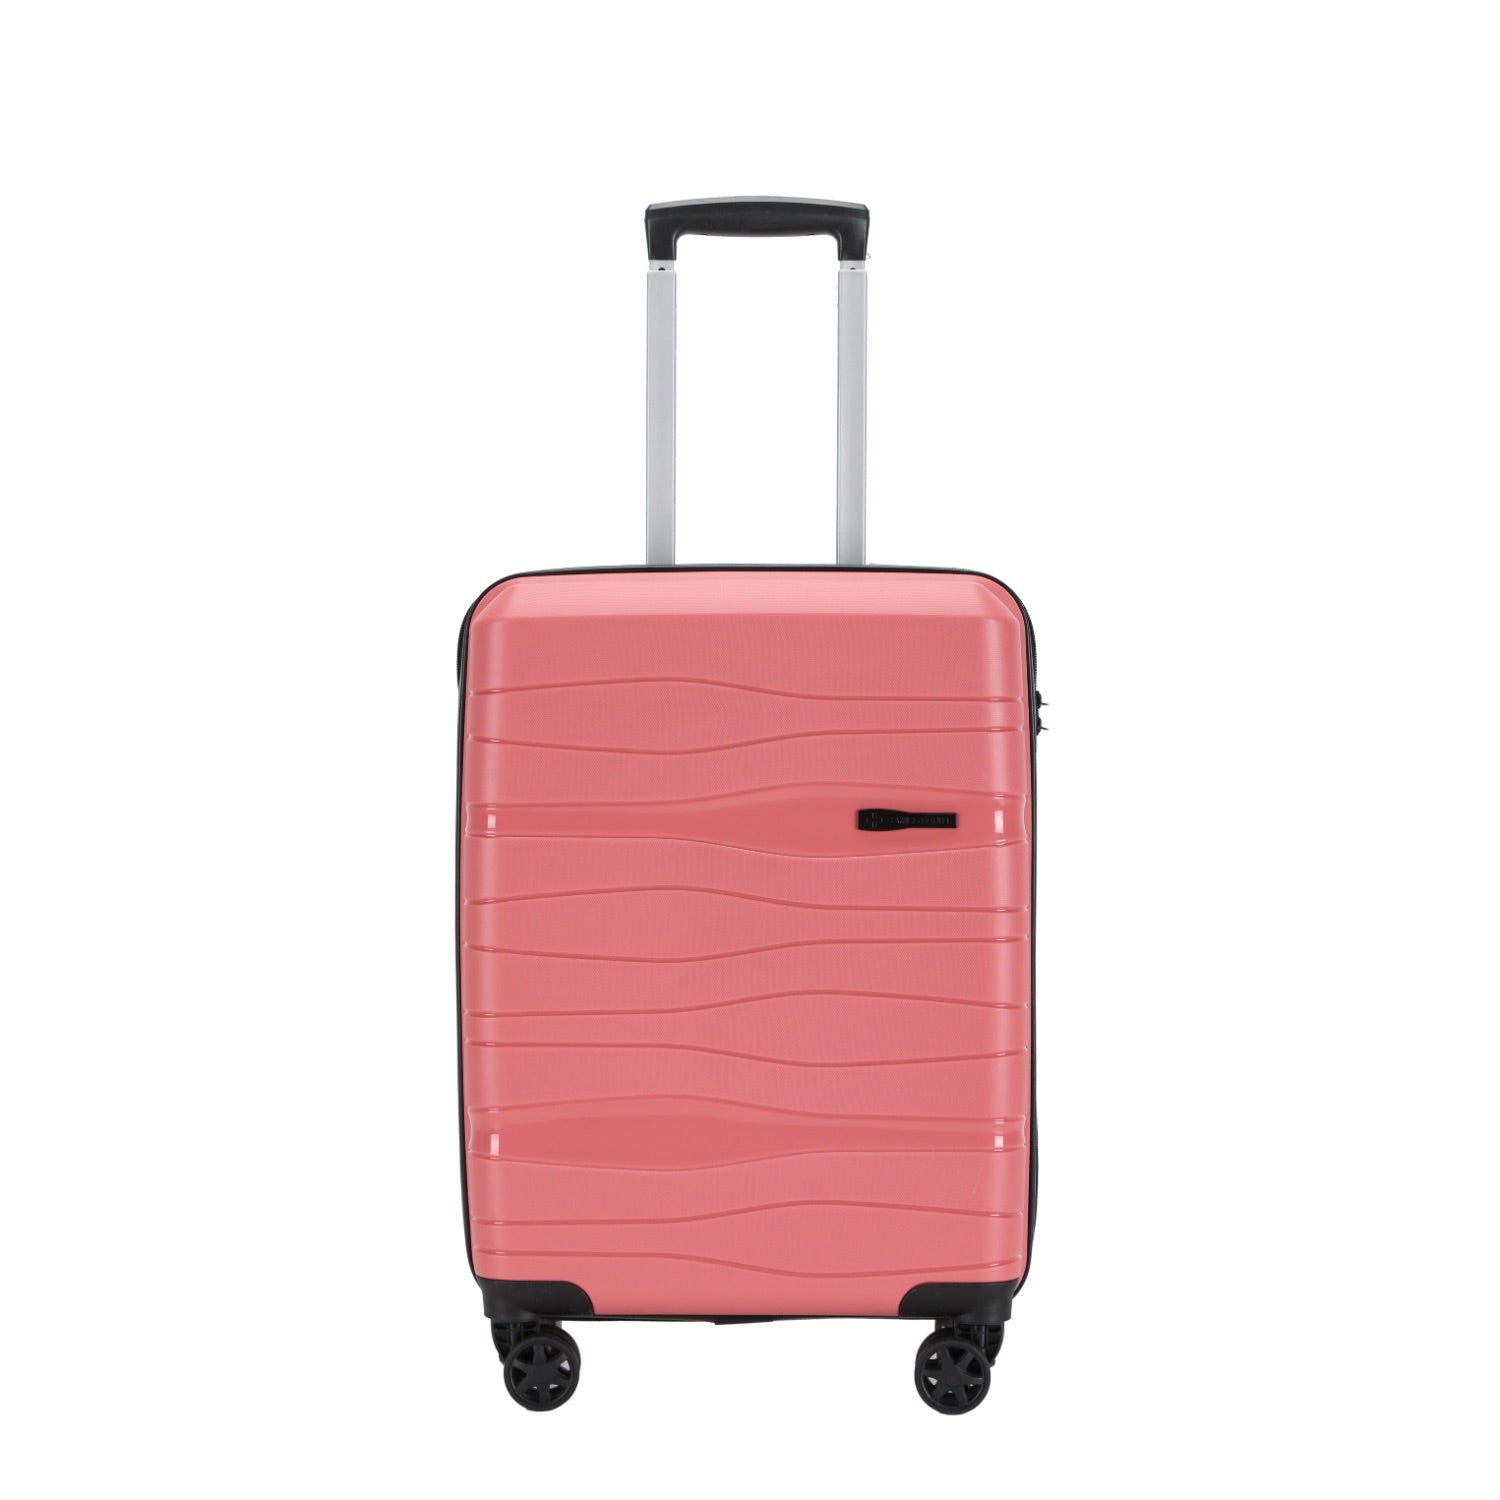 Swiss Equipe - Small Spinner suitecase - Pink